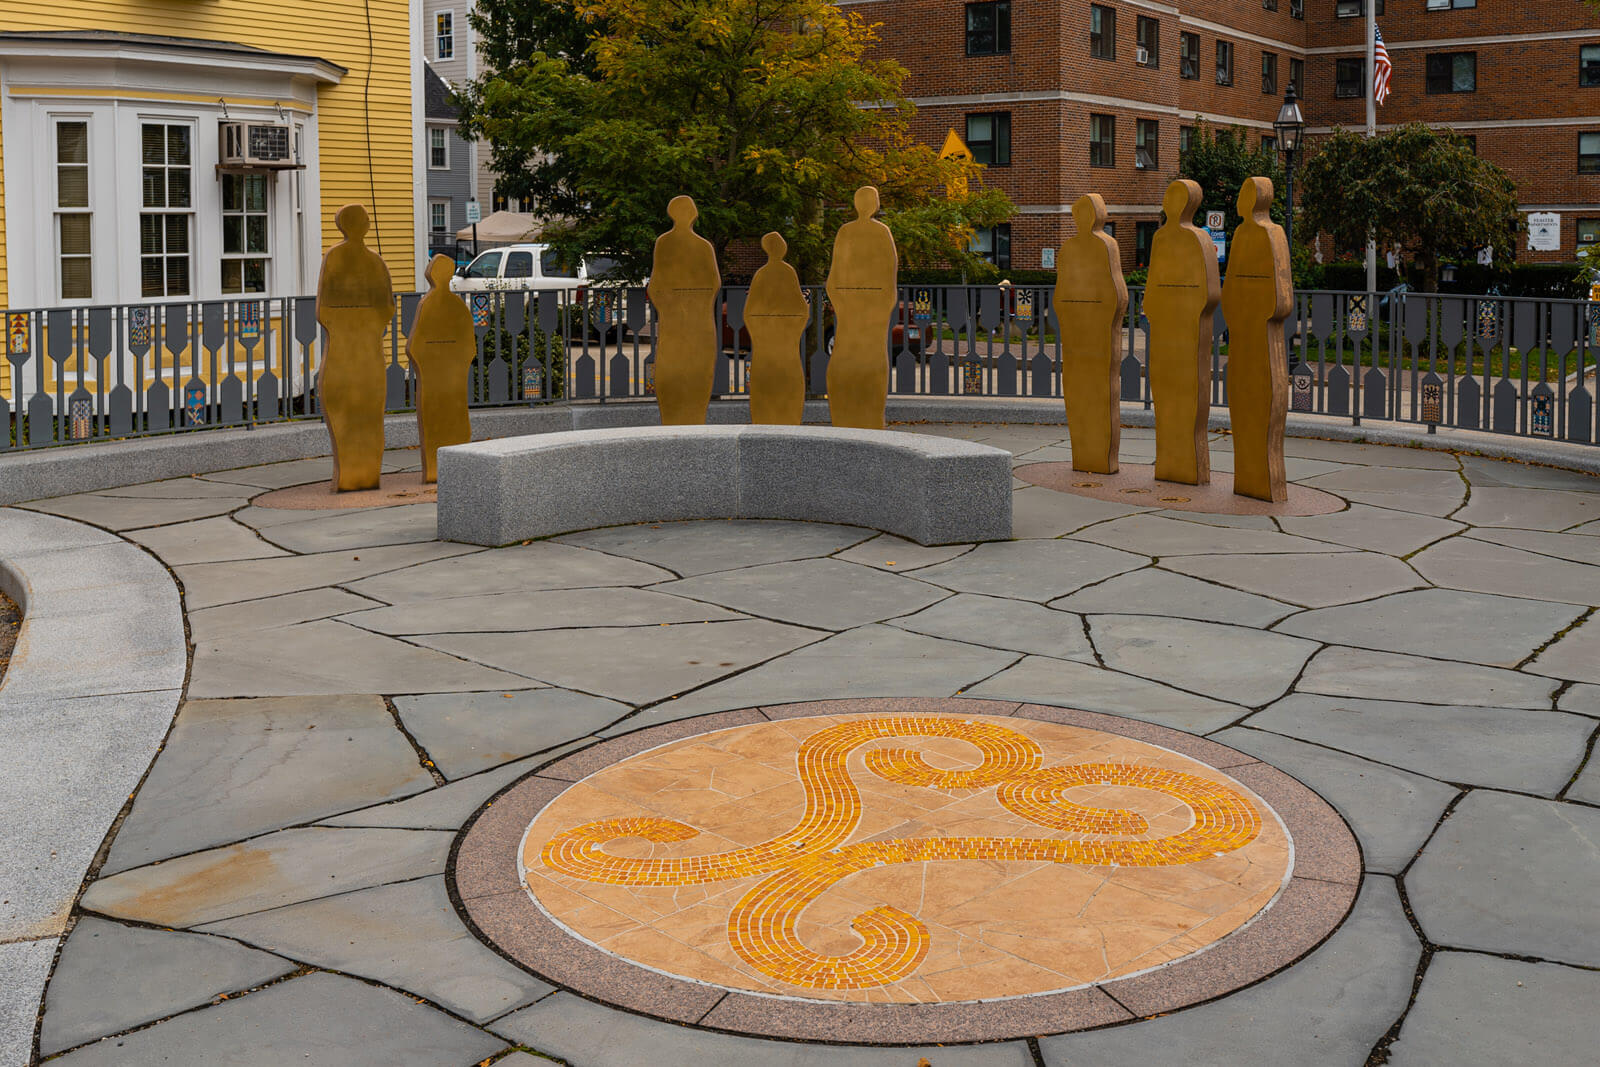 Portsmouth African Burial Ground Memorial in New Hampshire